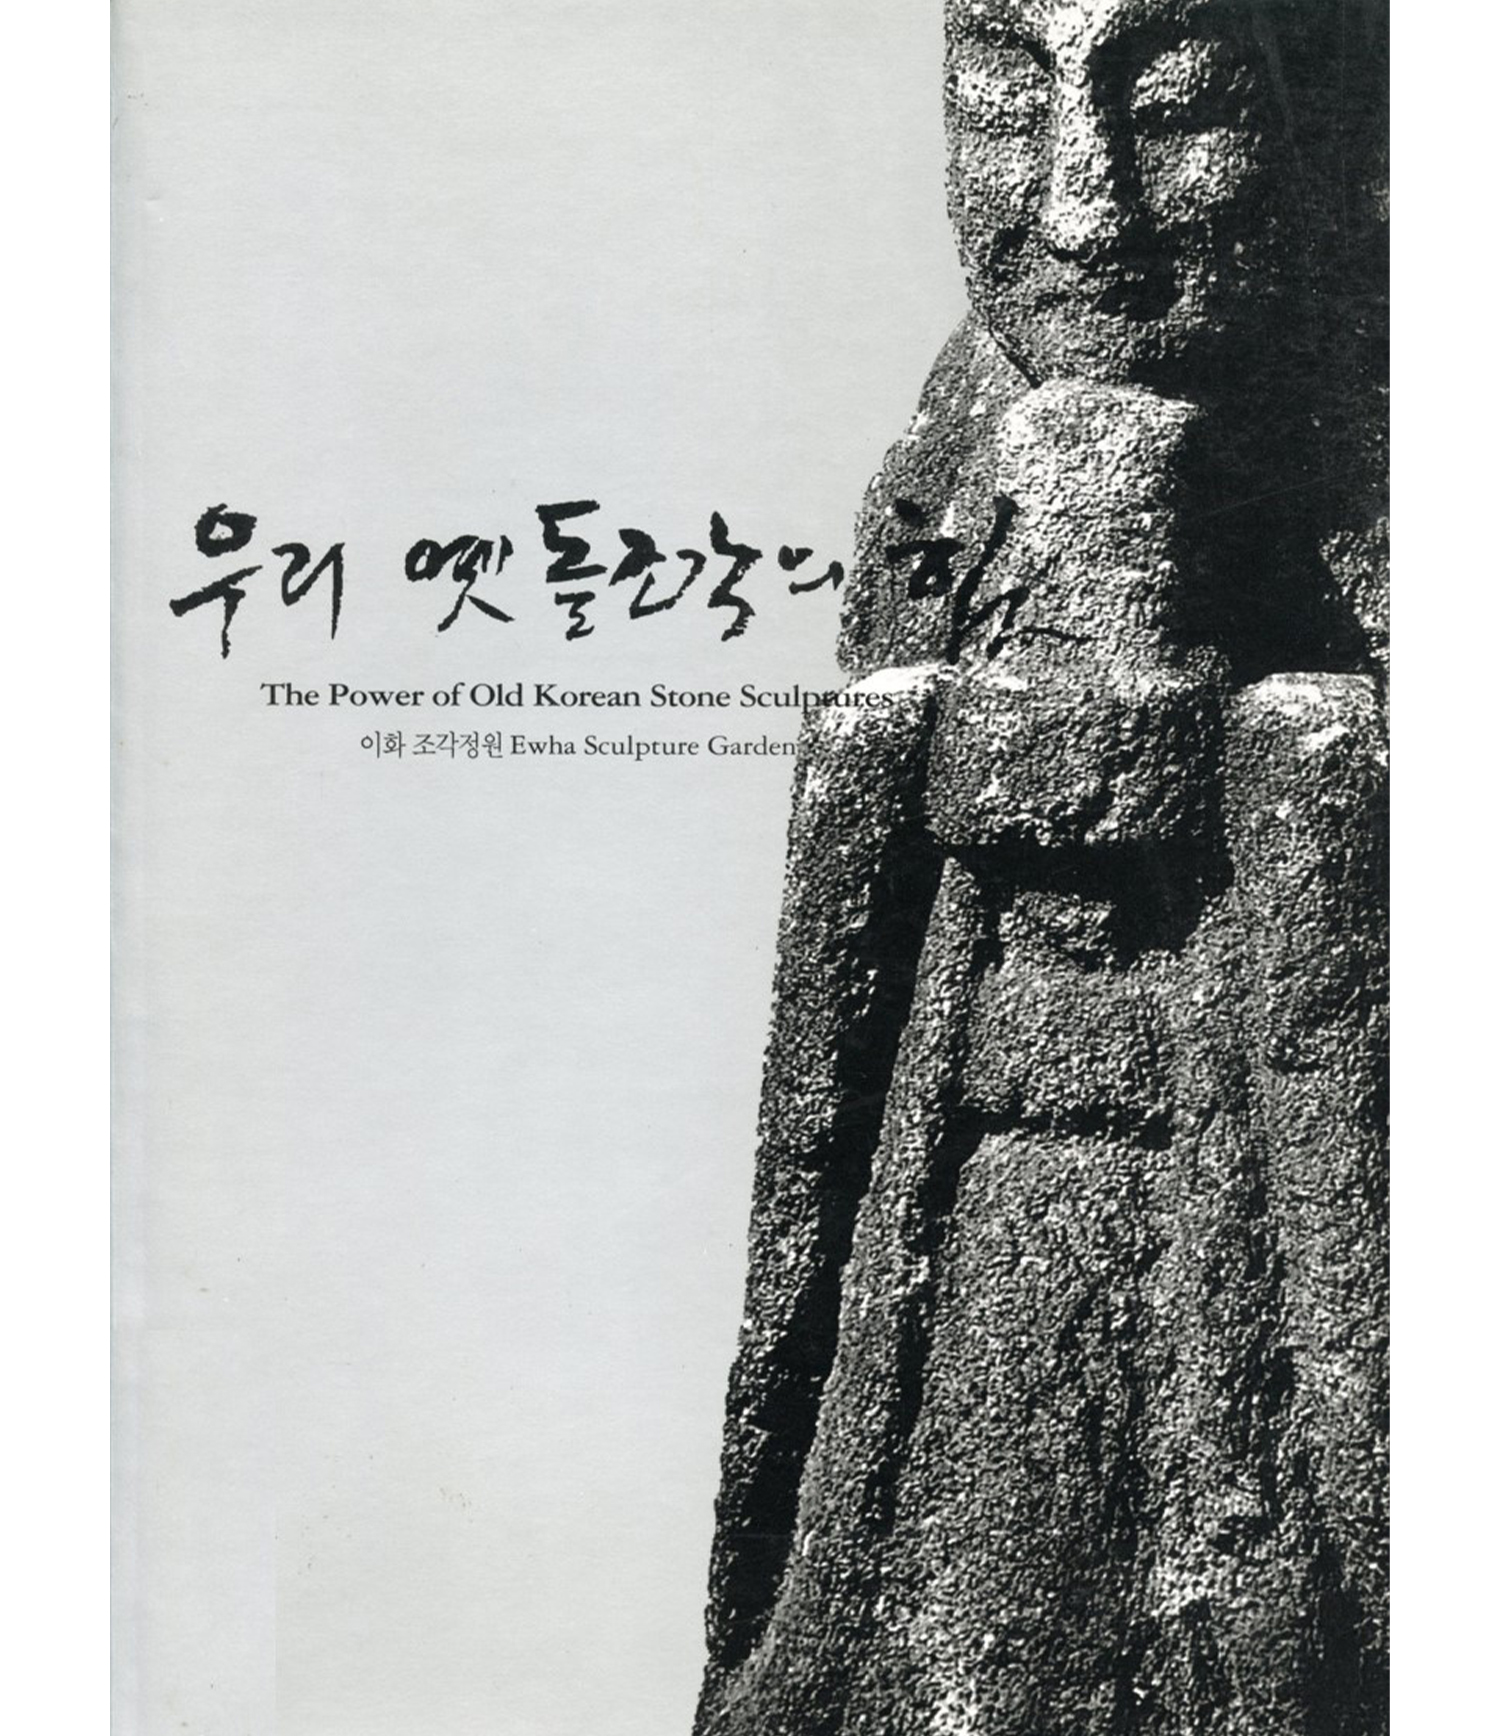 The Power of Old Korean Stone Sculptures